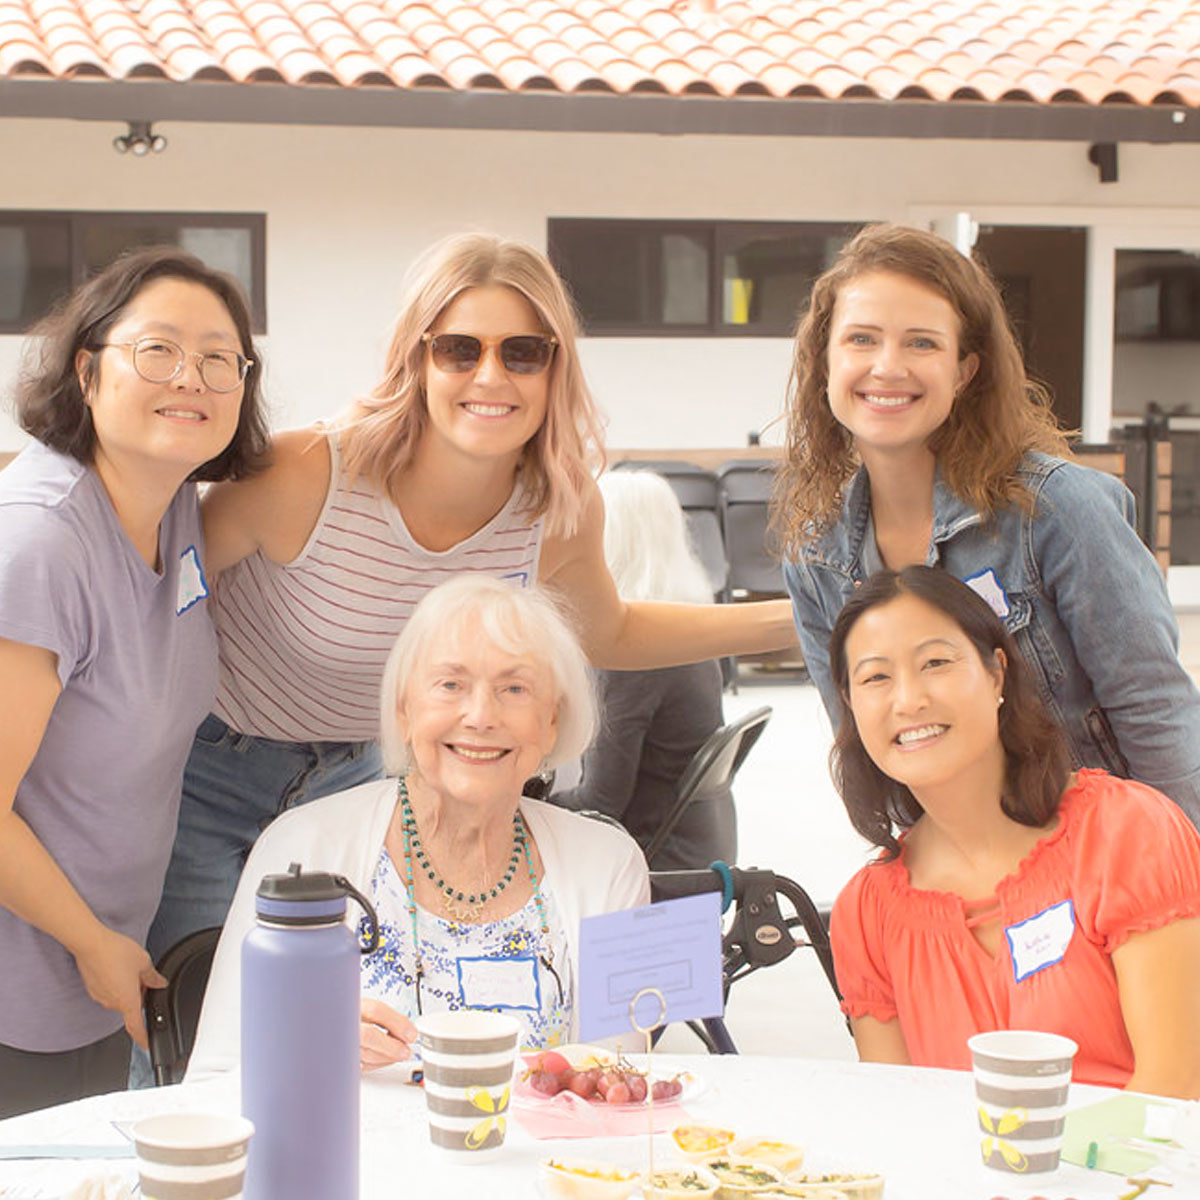 Women of varied ages posing for photo at a table outdoors